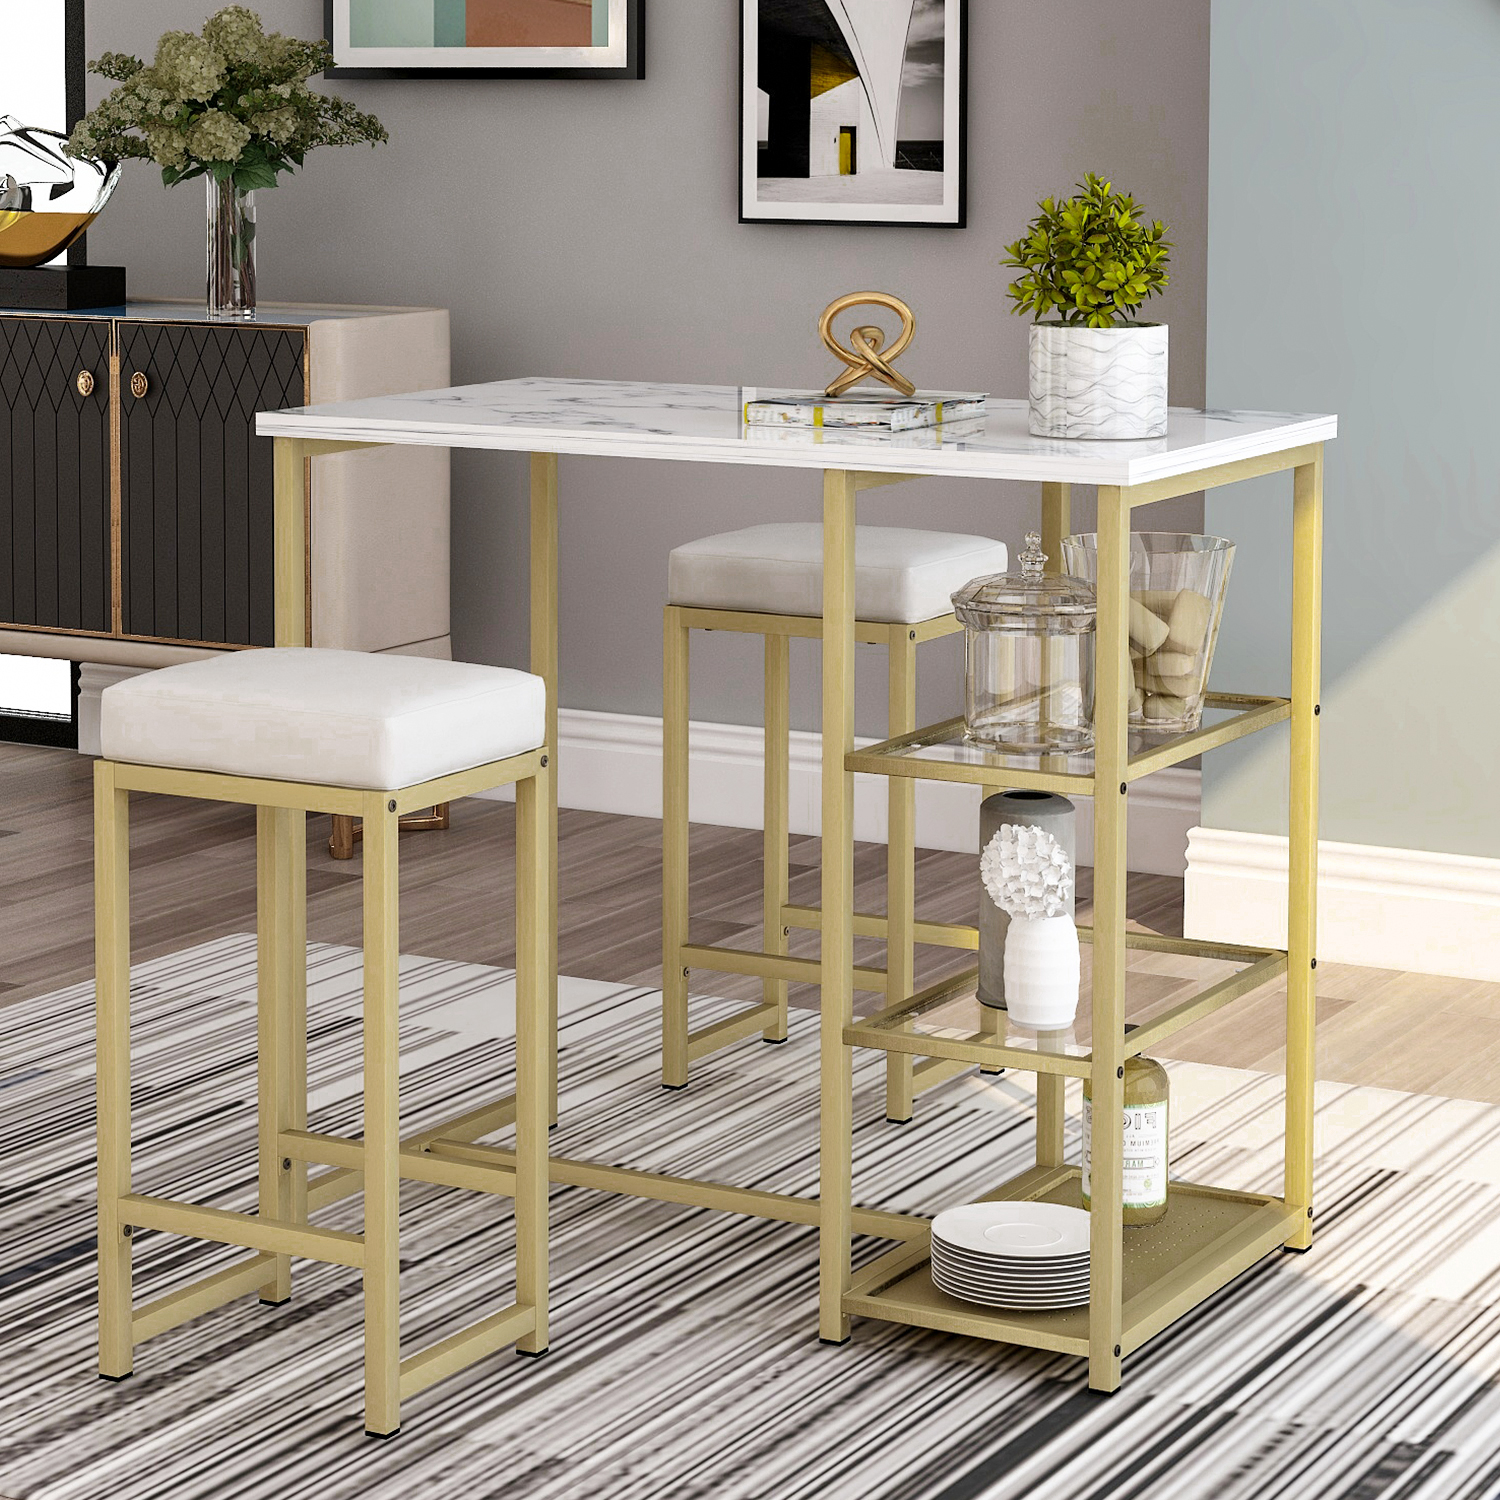 3-Piece Modern Pub Set With Faux Marble Countertop And Bar Stools - WF194723AAK